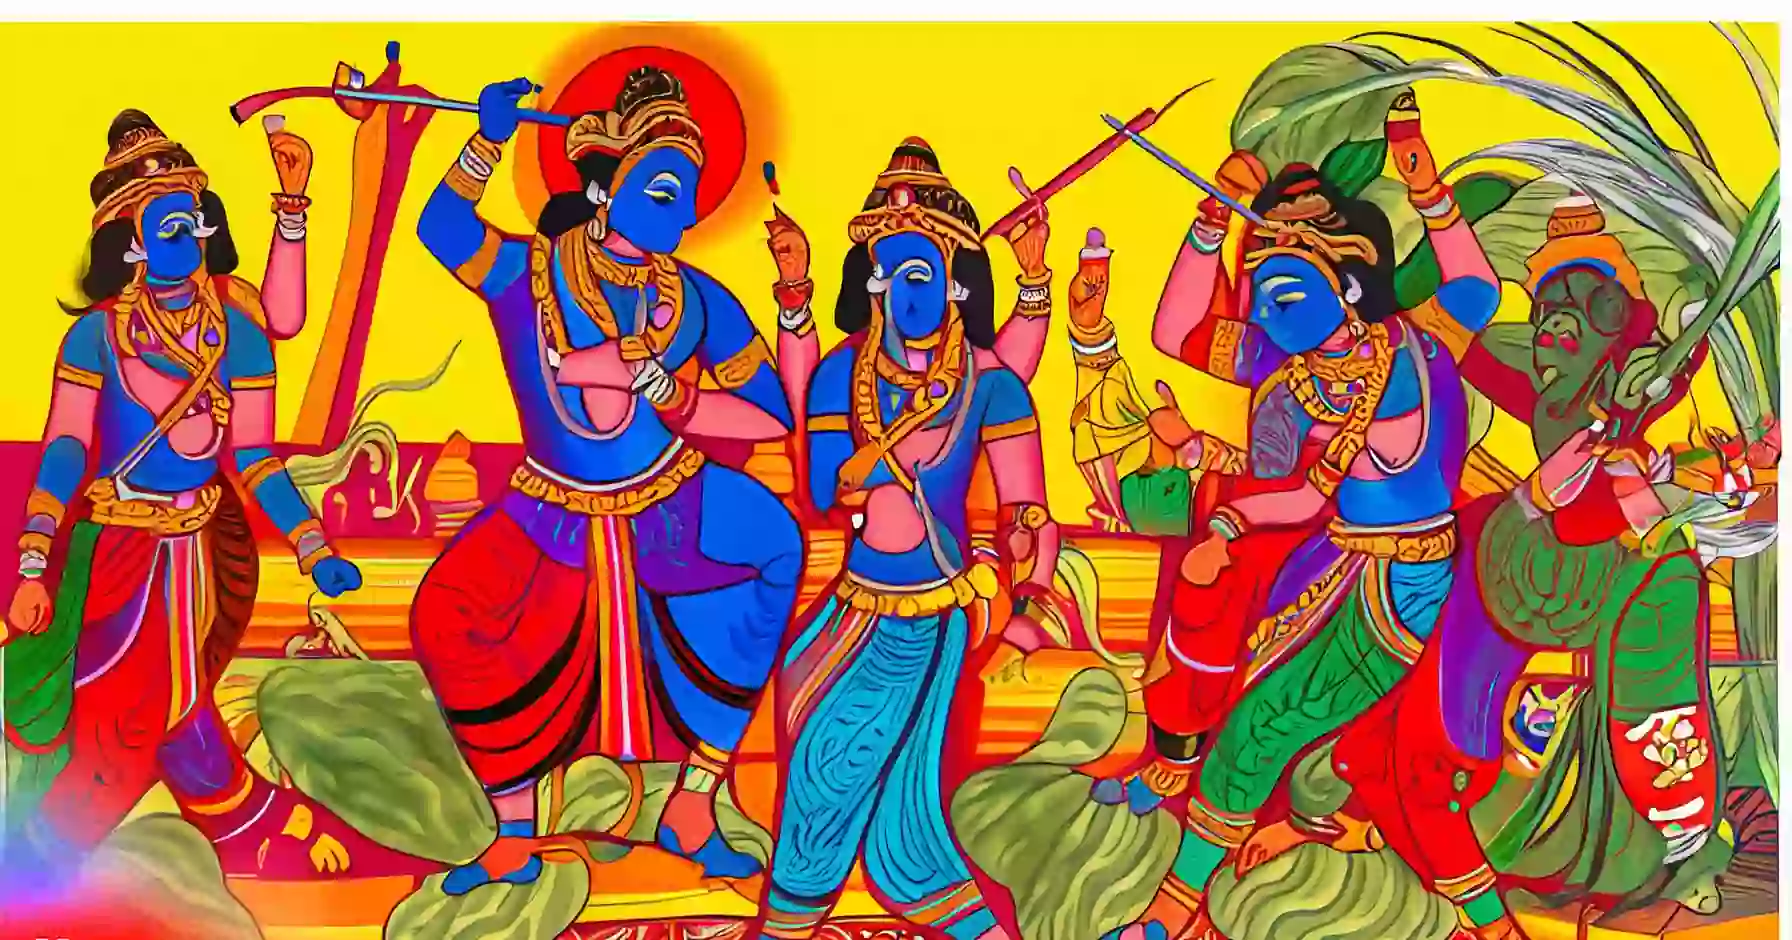 How do epics and mythology contribute to Indian culture?